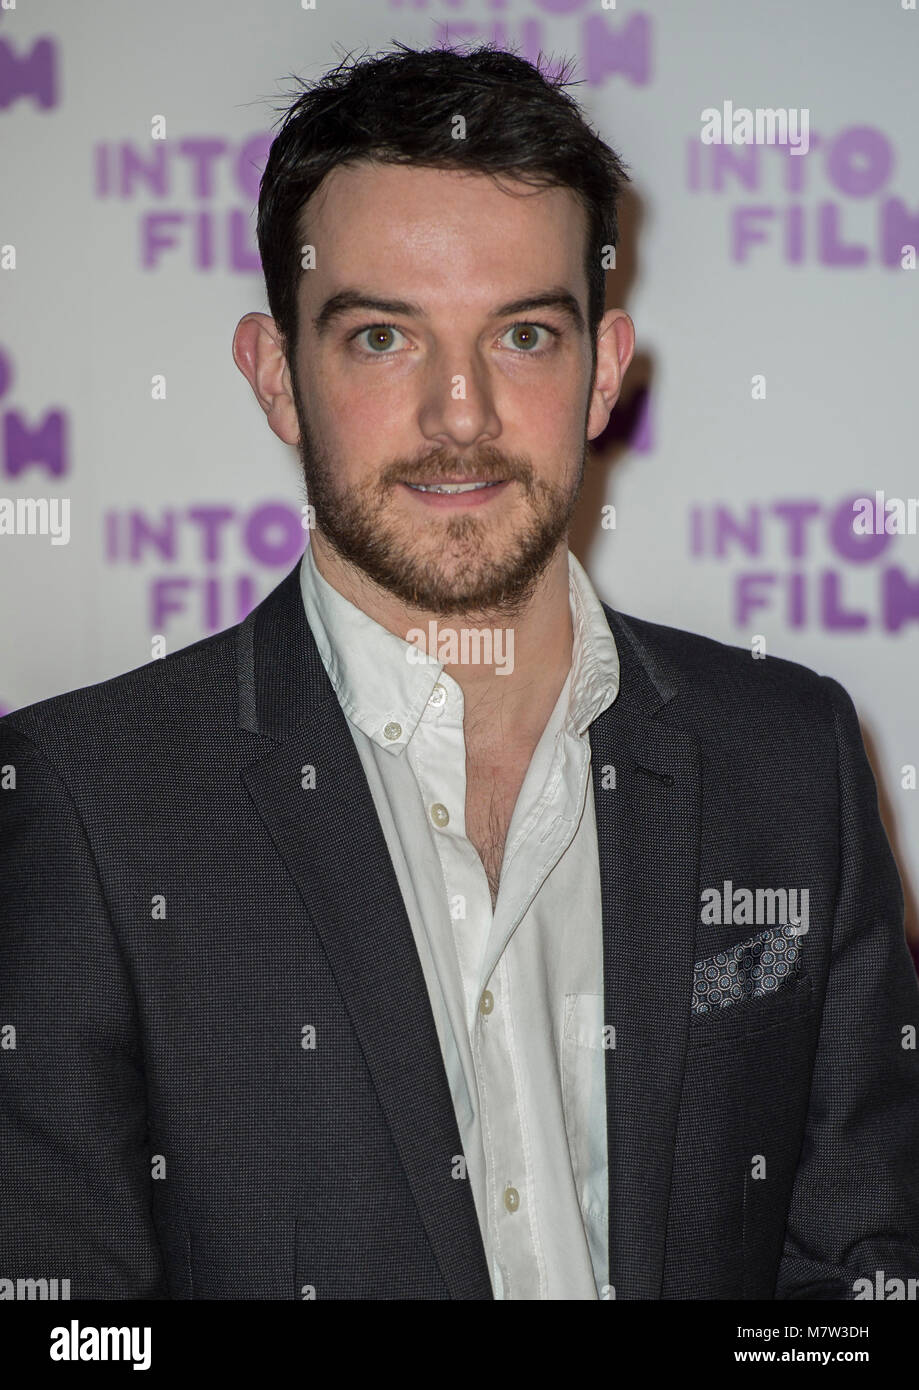 London, UK. 13th March, 2018. Kevin Guthrie attends the Into Film Stock Photo: 176957805 - Alamy